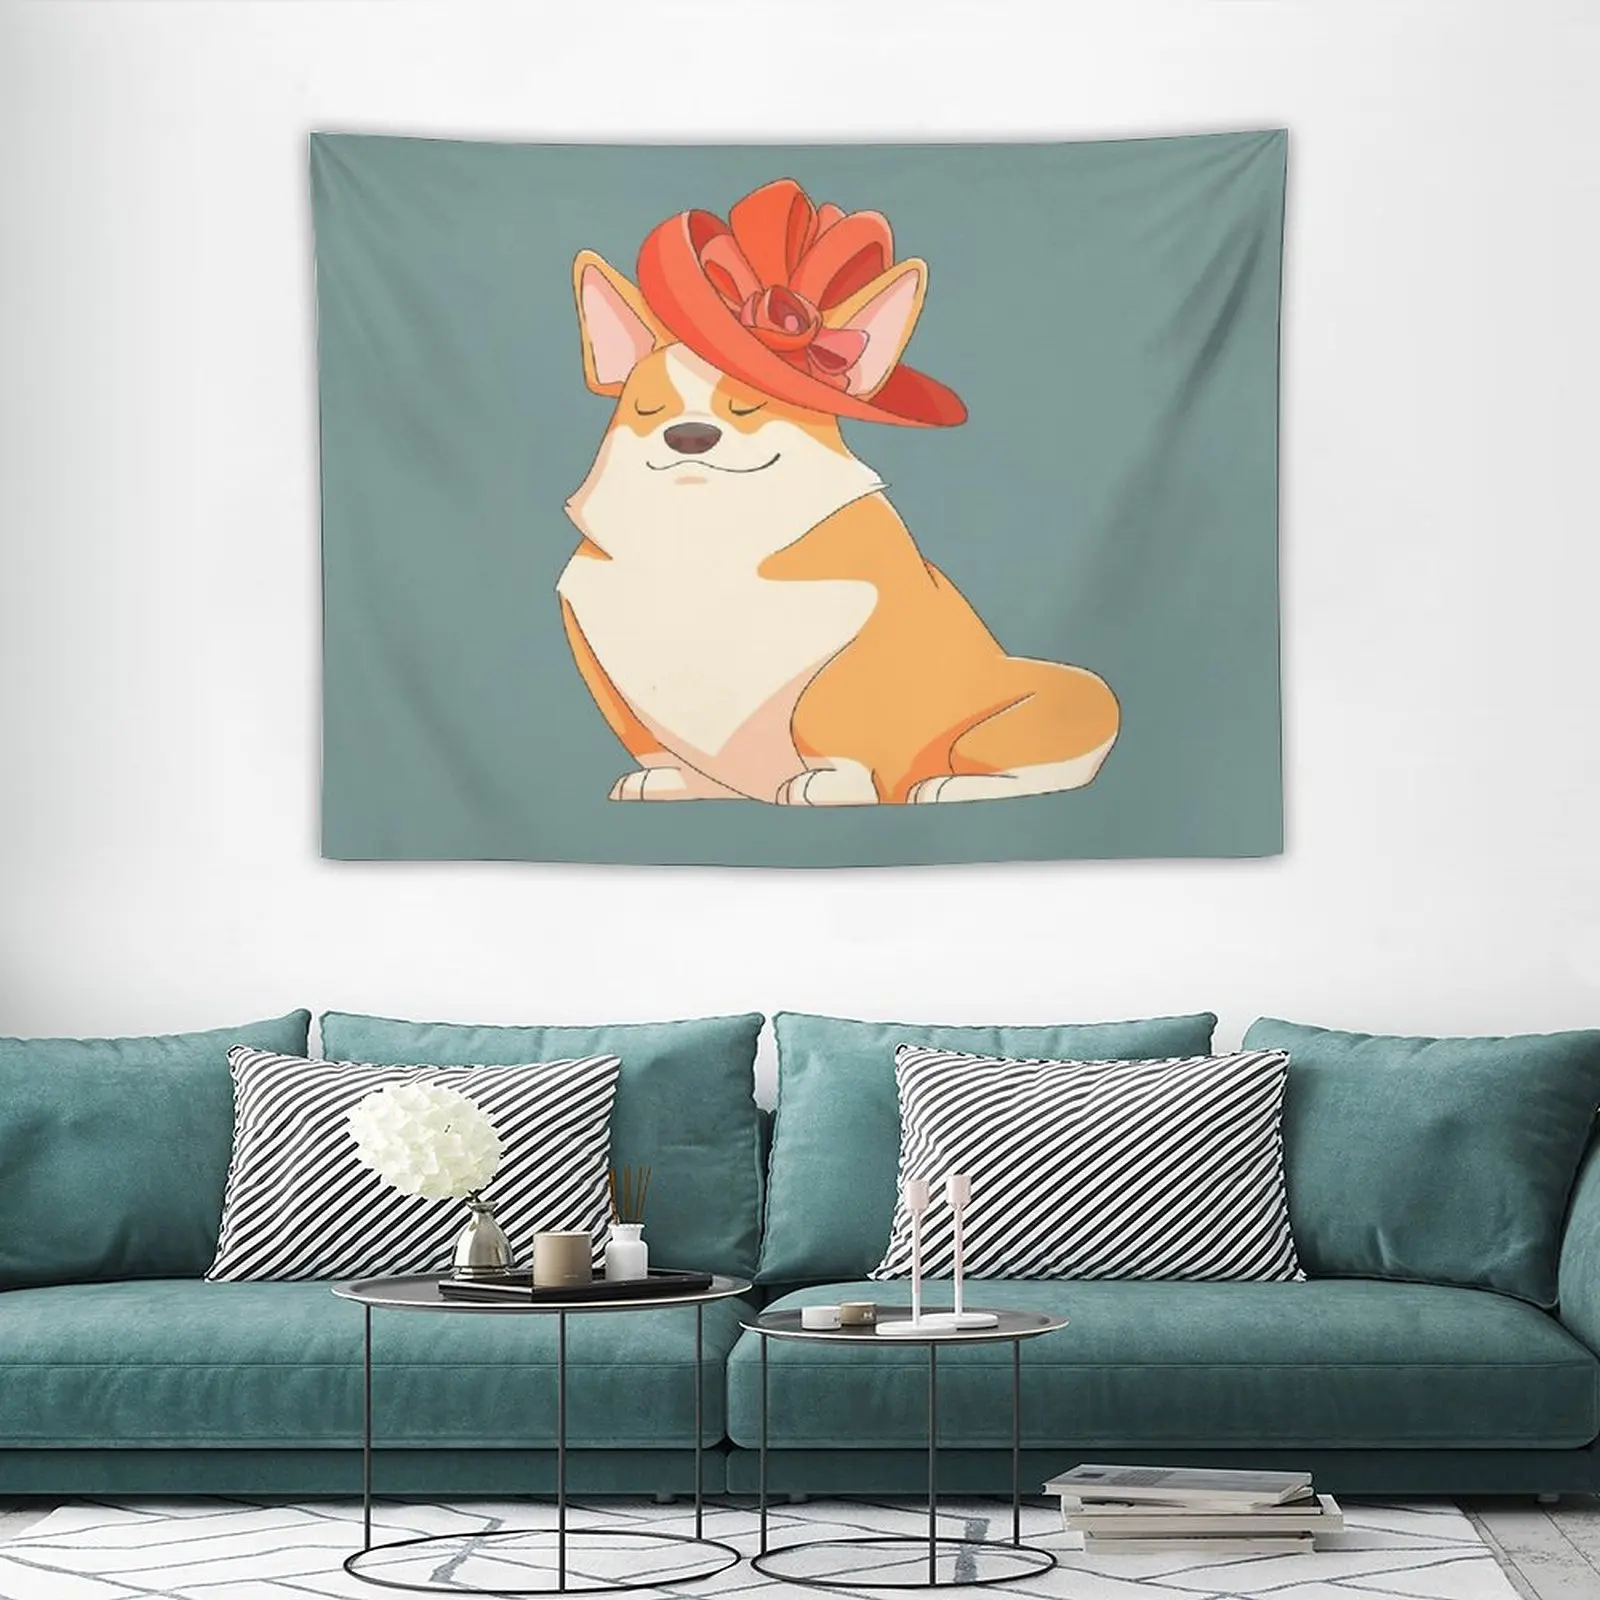 

Wall Art Corgi Tapestry Decorative Paintings Decor for Room Room Decoration Aesthetic Gothic Home Decor